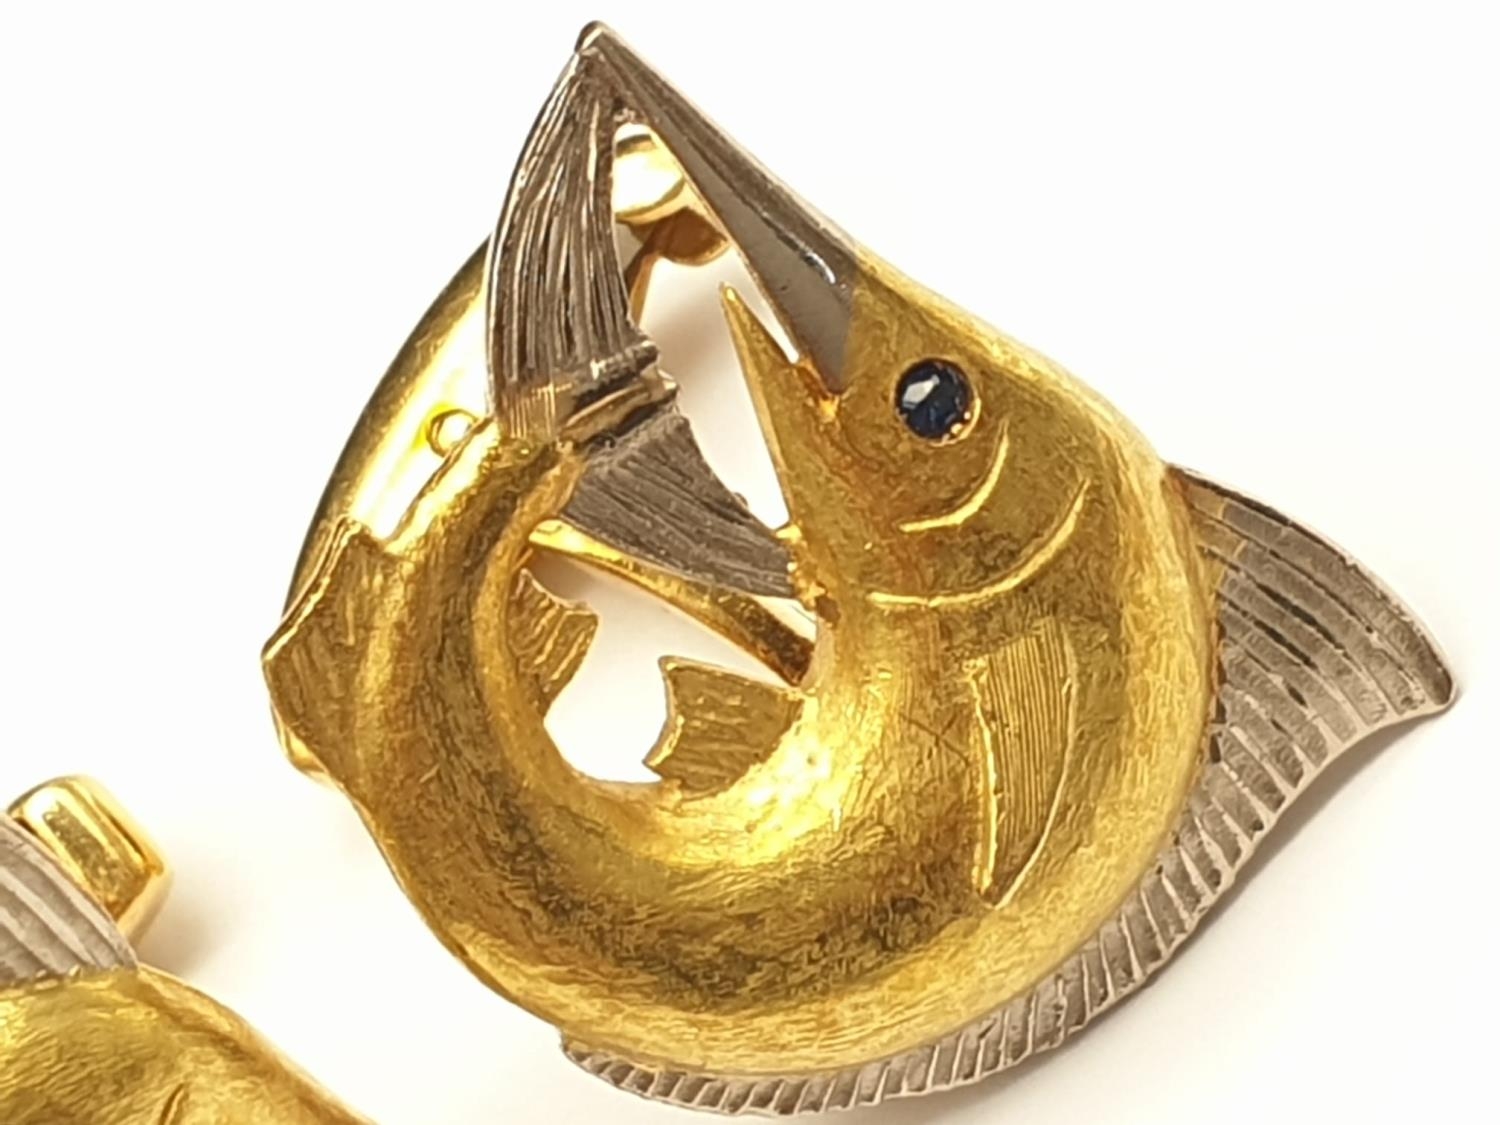 Exquisite Pair of Hand-Made 18K White and Yellow Gold Sailfish Cufflinks with Sapphire Stone Eyes. - Image 2 of 5